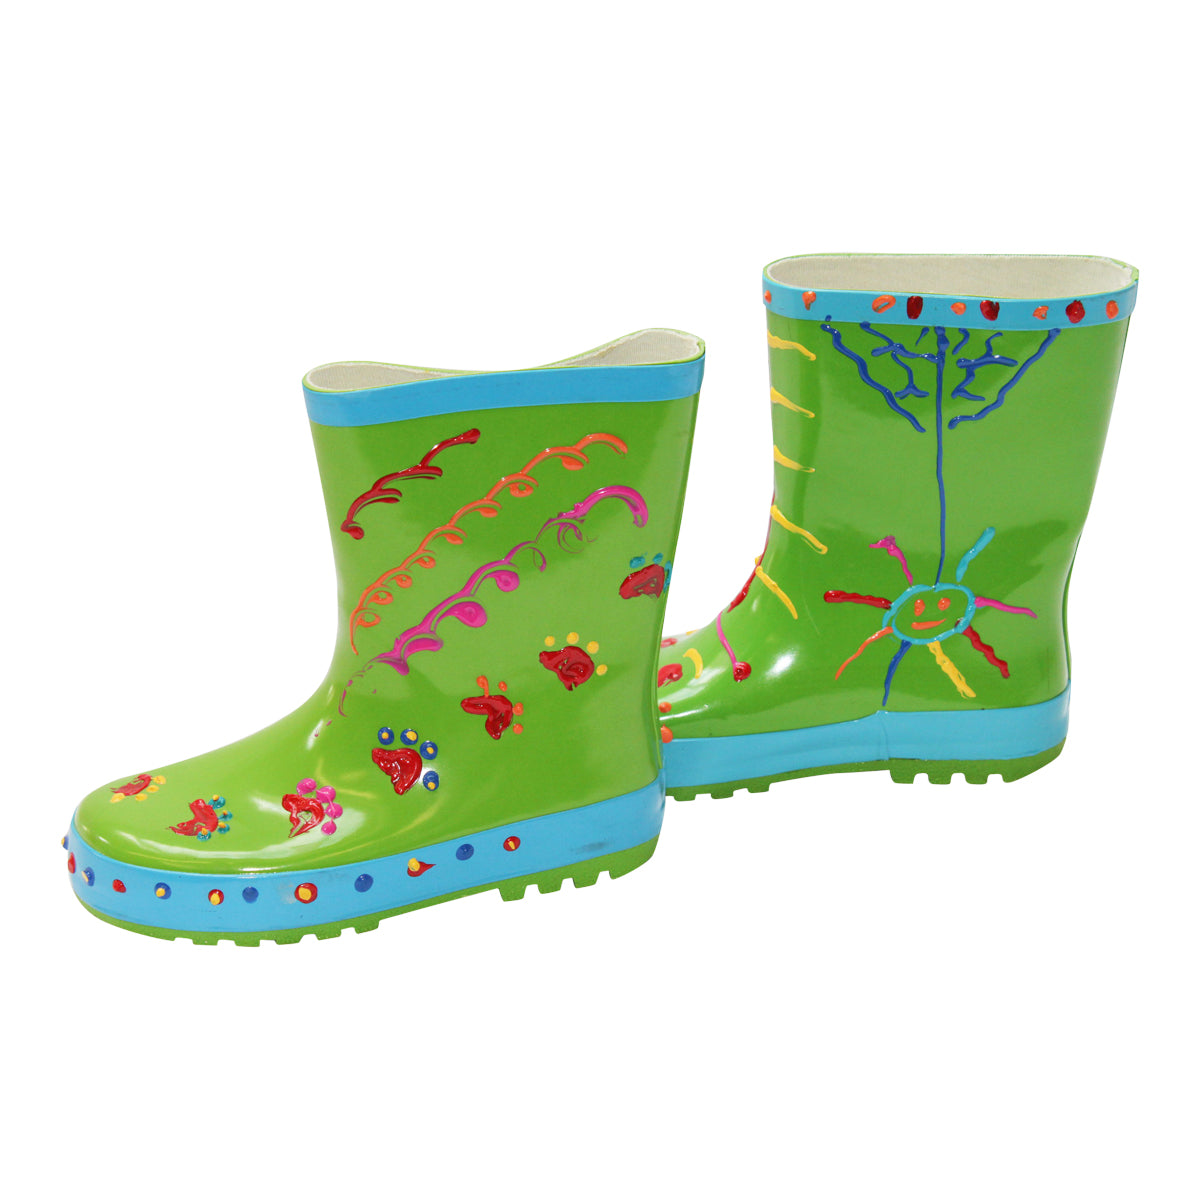 Little Pals Paint Your Own Wellies Rain Boots Green with Blue Trim Kids US Size 11.5